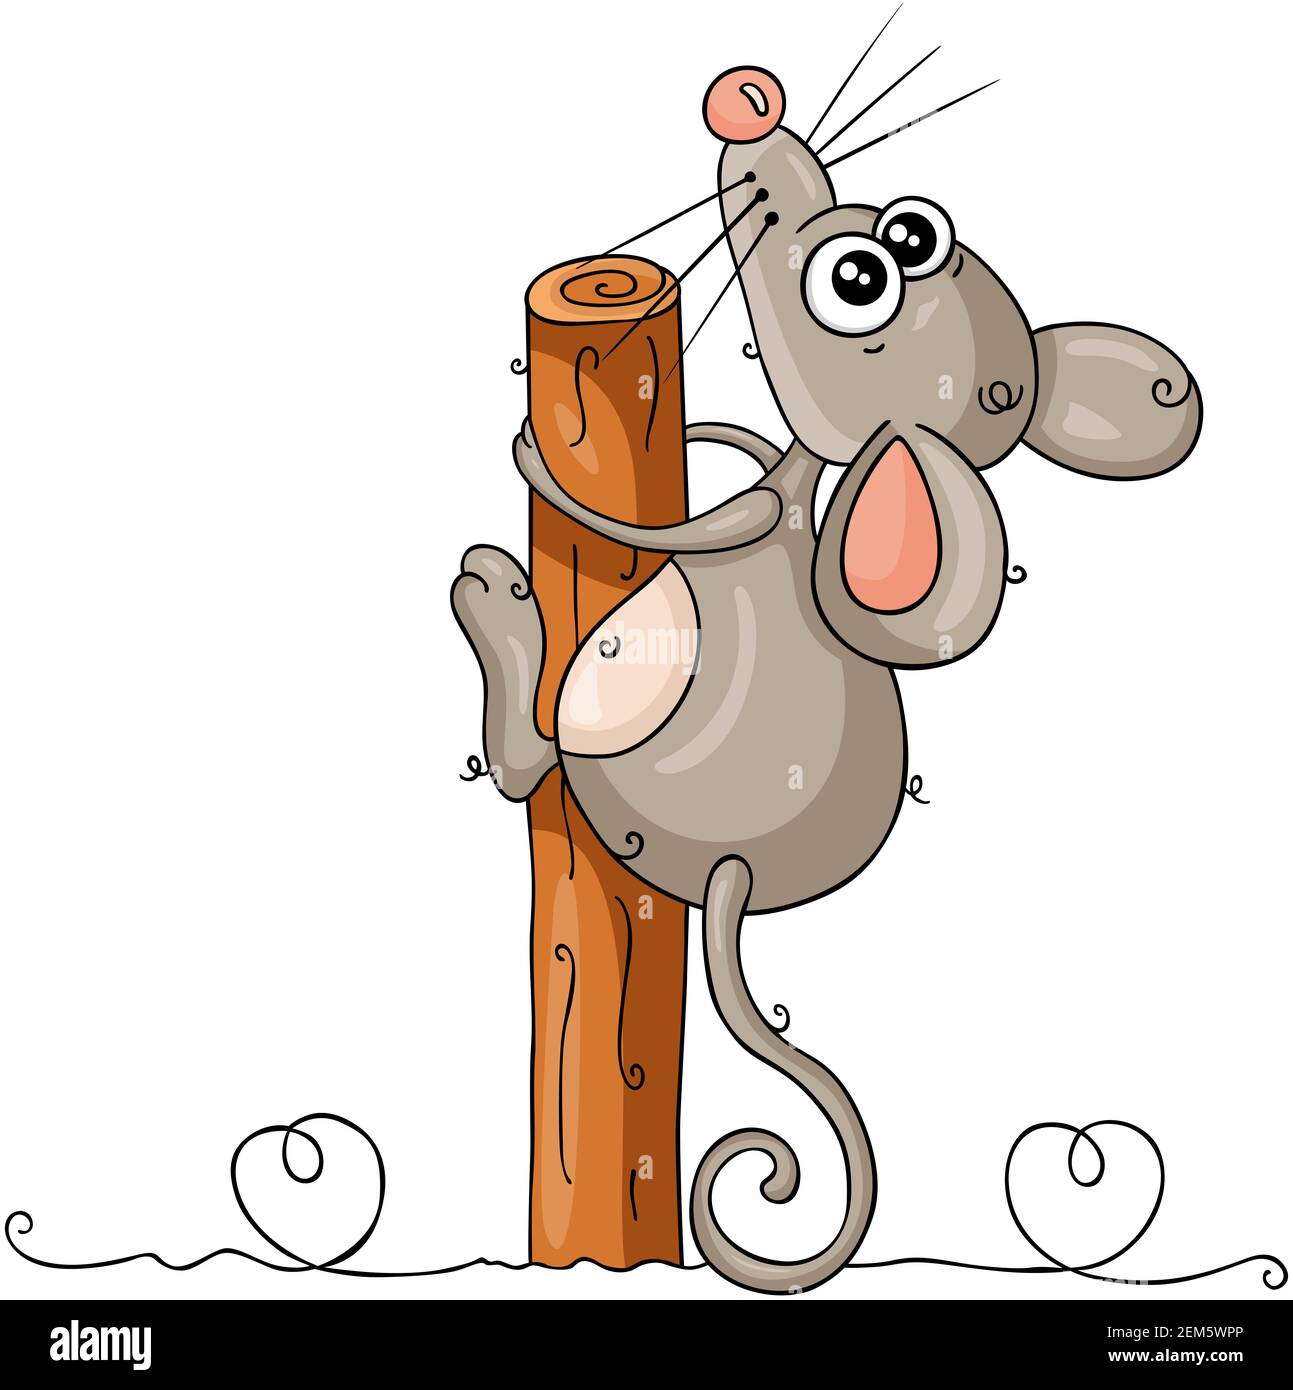 Funny mouse looking up clinging to tree trunk Stock Photo